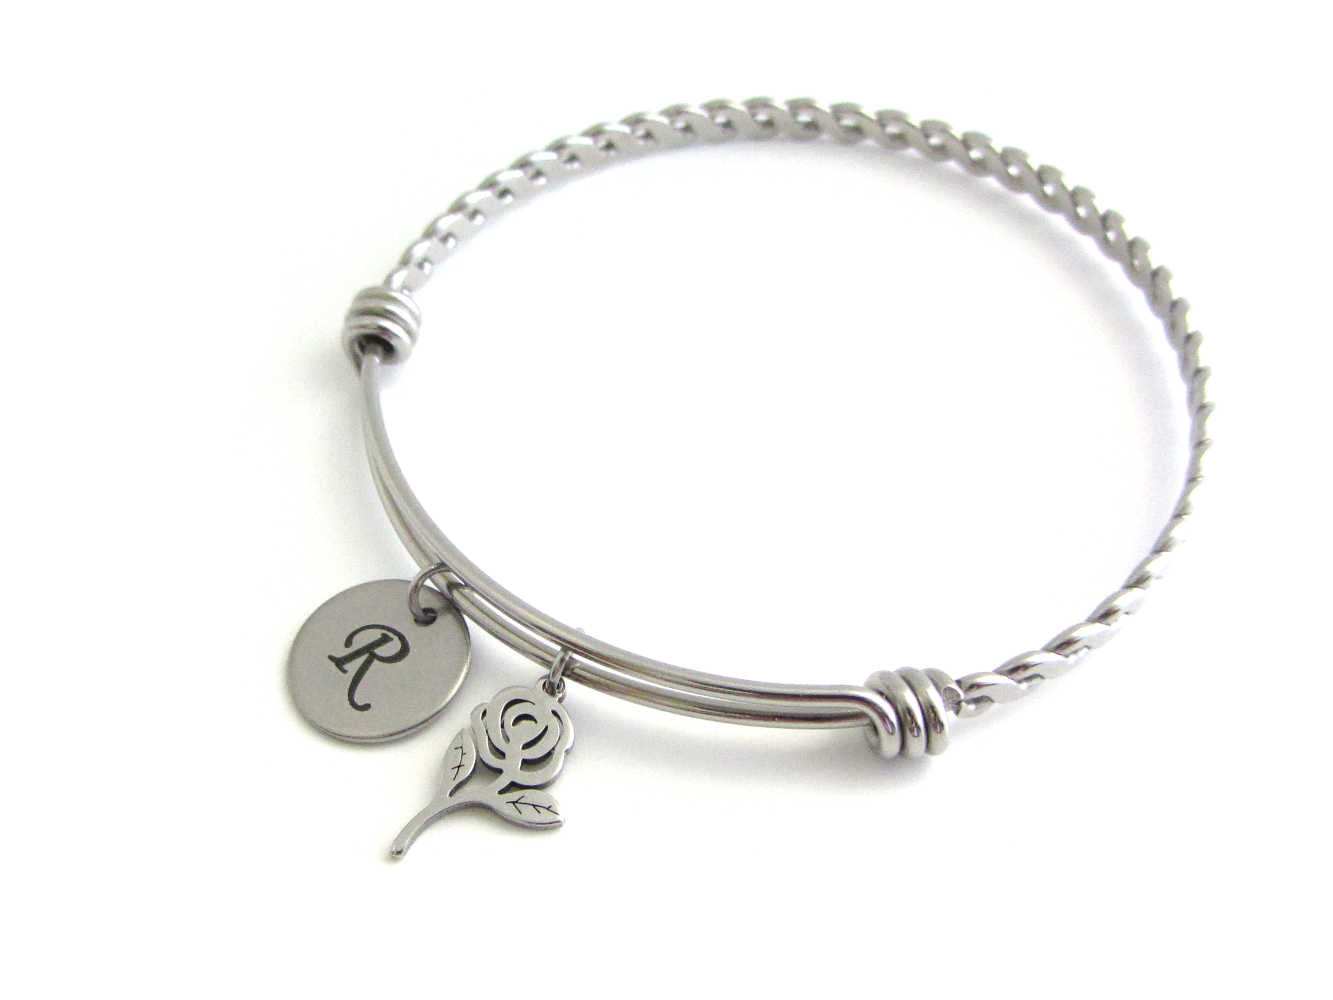 laser engraved capital initial letter disc charm and a rose flower charm on a bangle with braided twist pattern